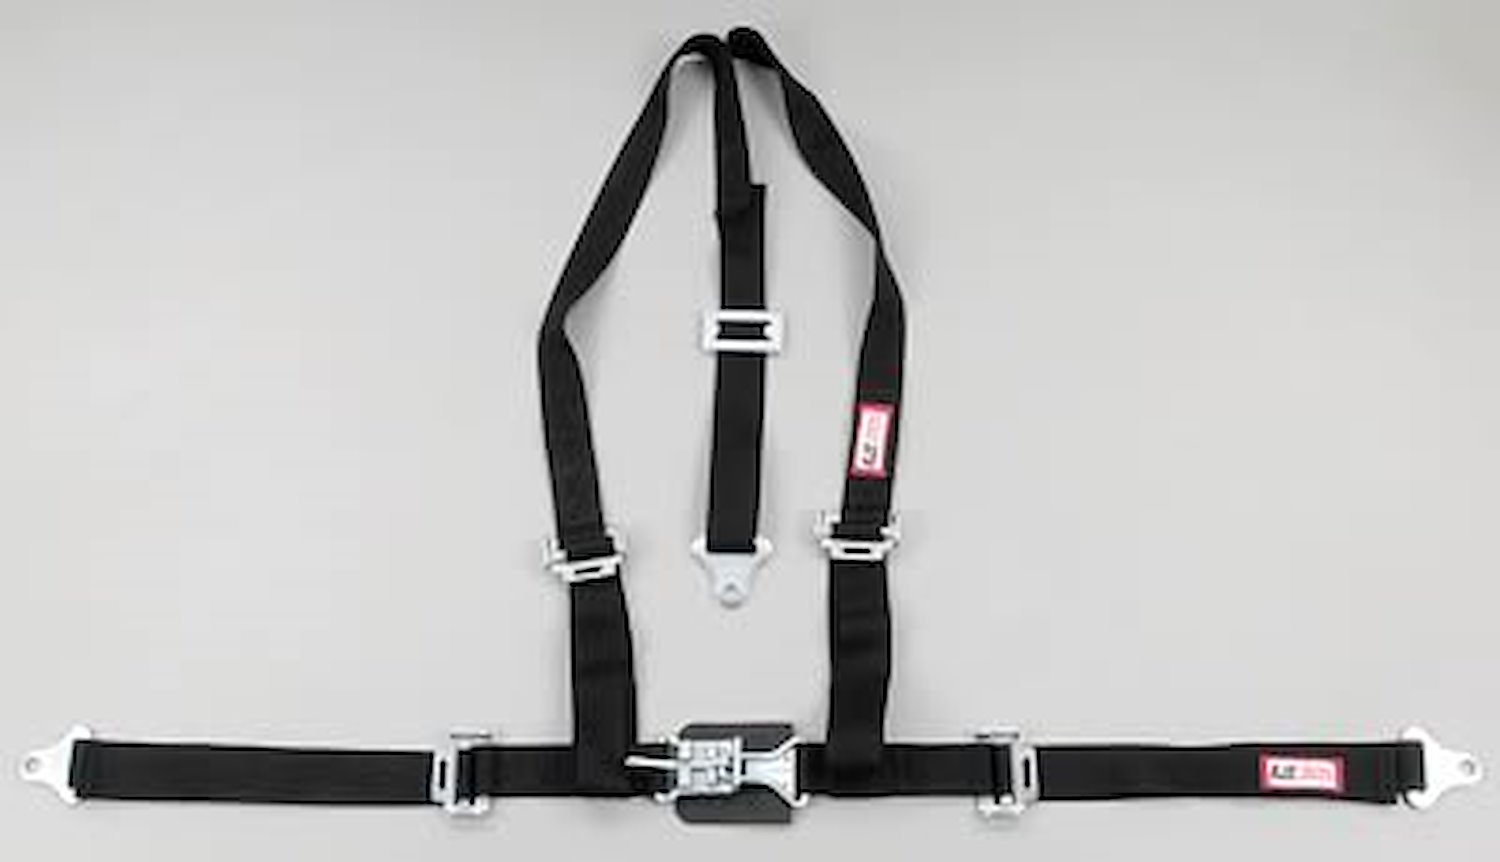 NON-SFI L&L HARNESS 2 PULL DOWN Lap Belt SEWN IN 2 S.H. INDIVIDUAL FLOOR Mount w/STERNUM STRAP ALL WRAP ENDS GRAY